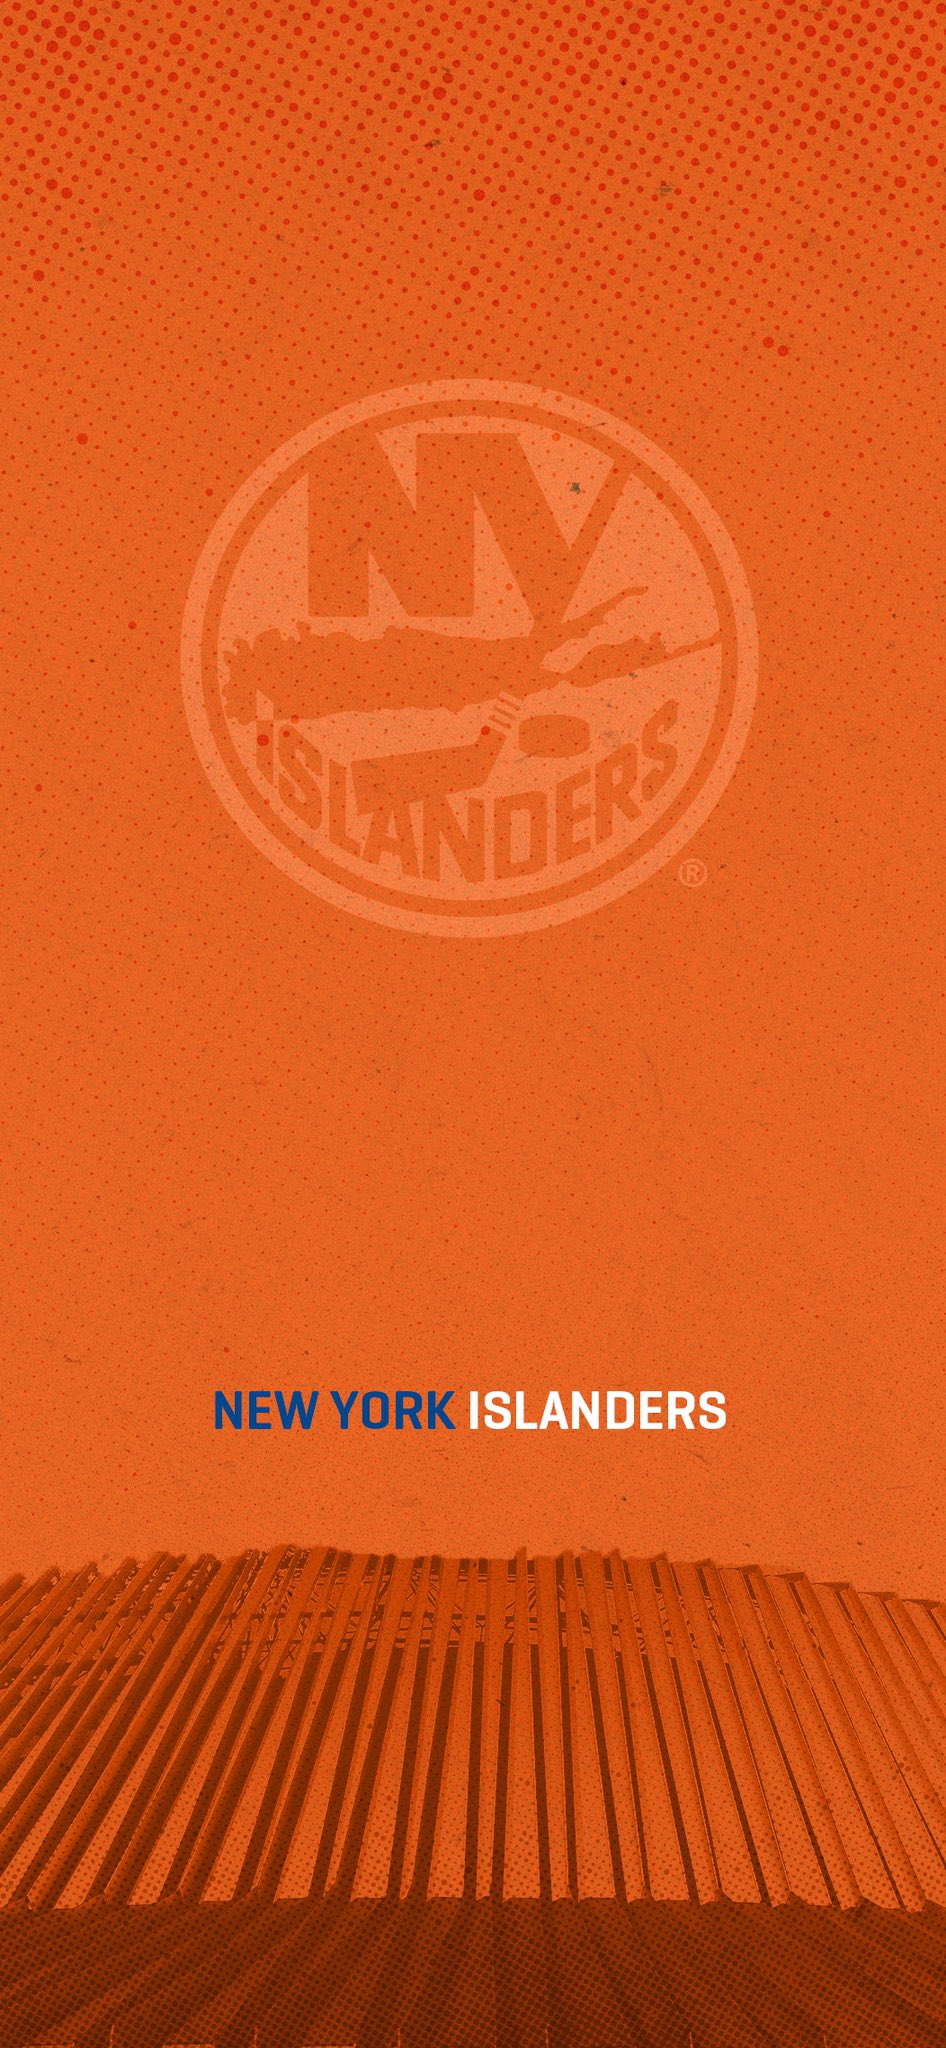 New York Islanders on X: Happy #WallpaperWednesday! 👏📱 For our